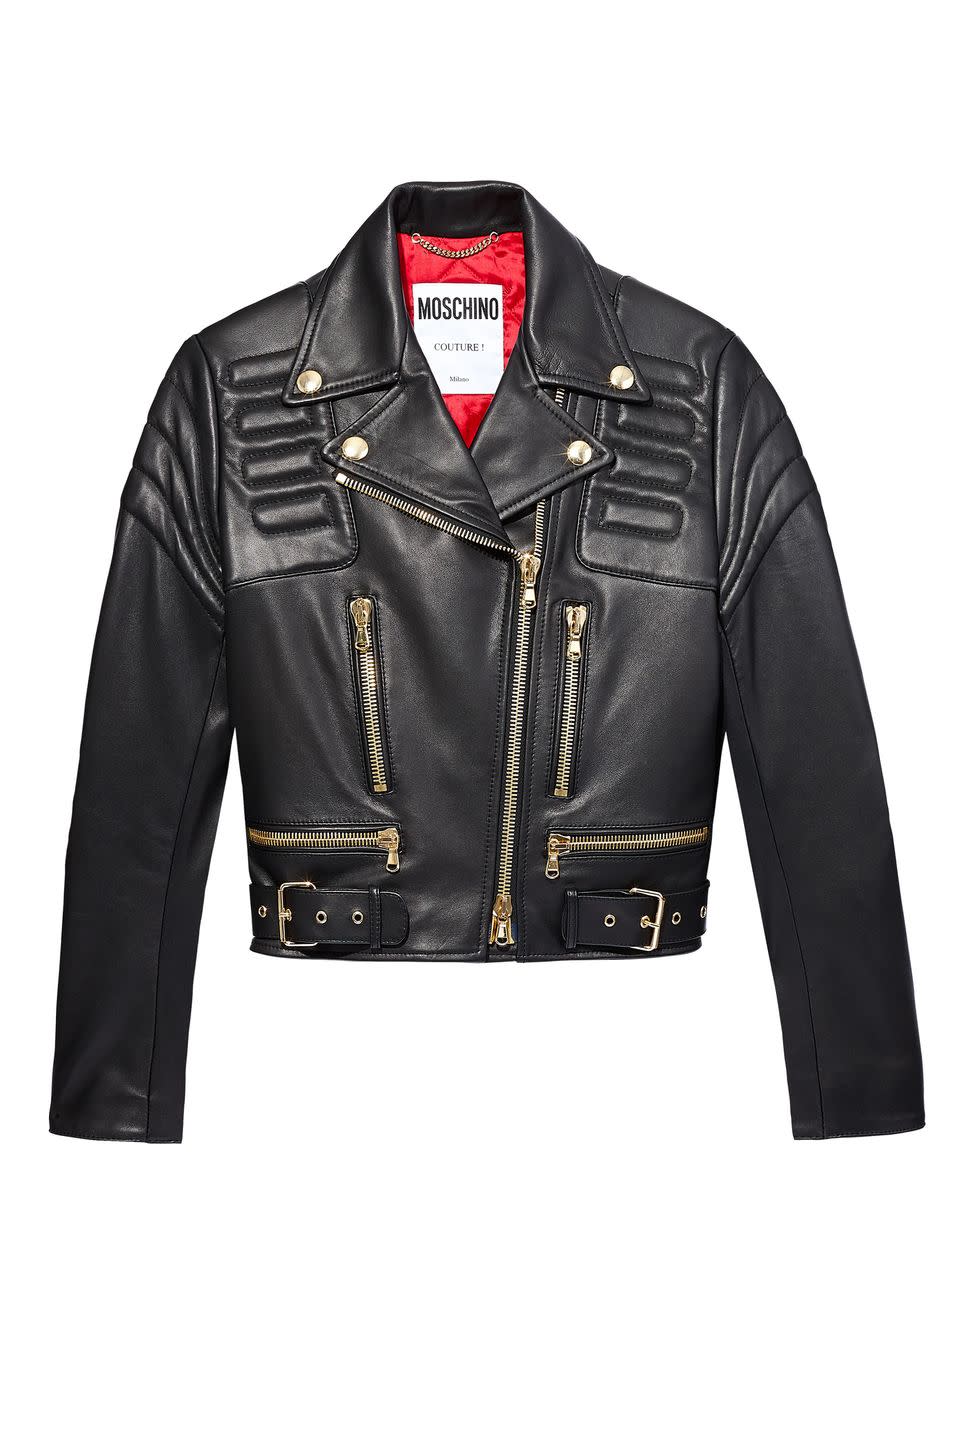 8 Leather Jackets That Are Not Your Average Moto